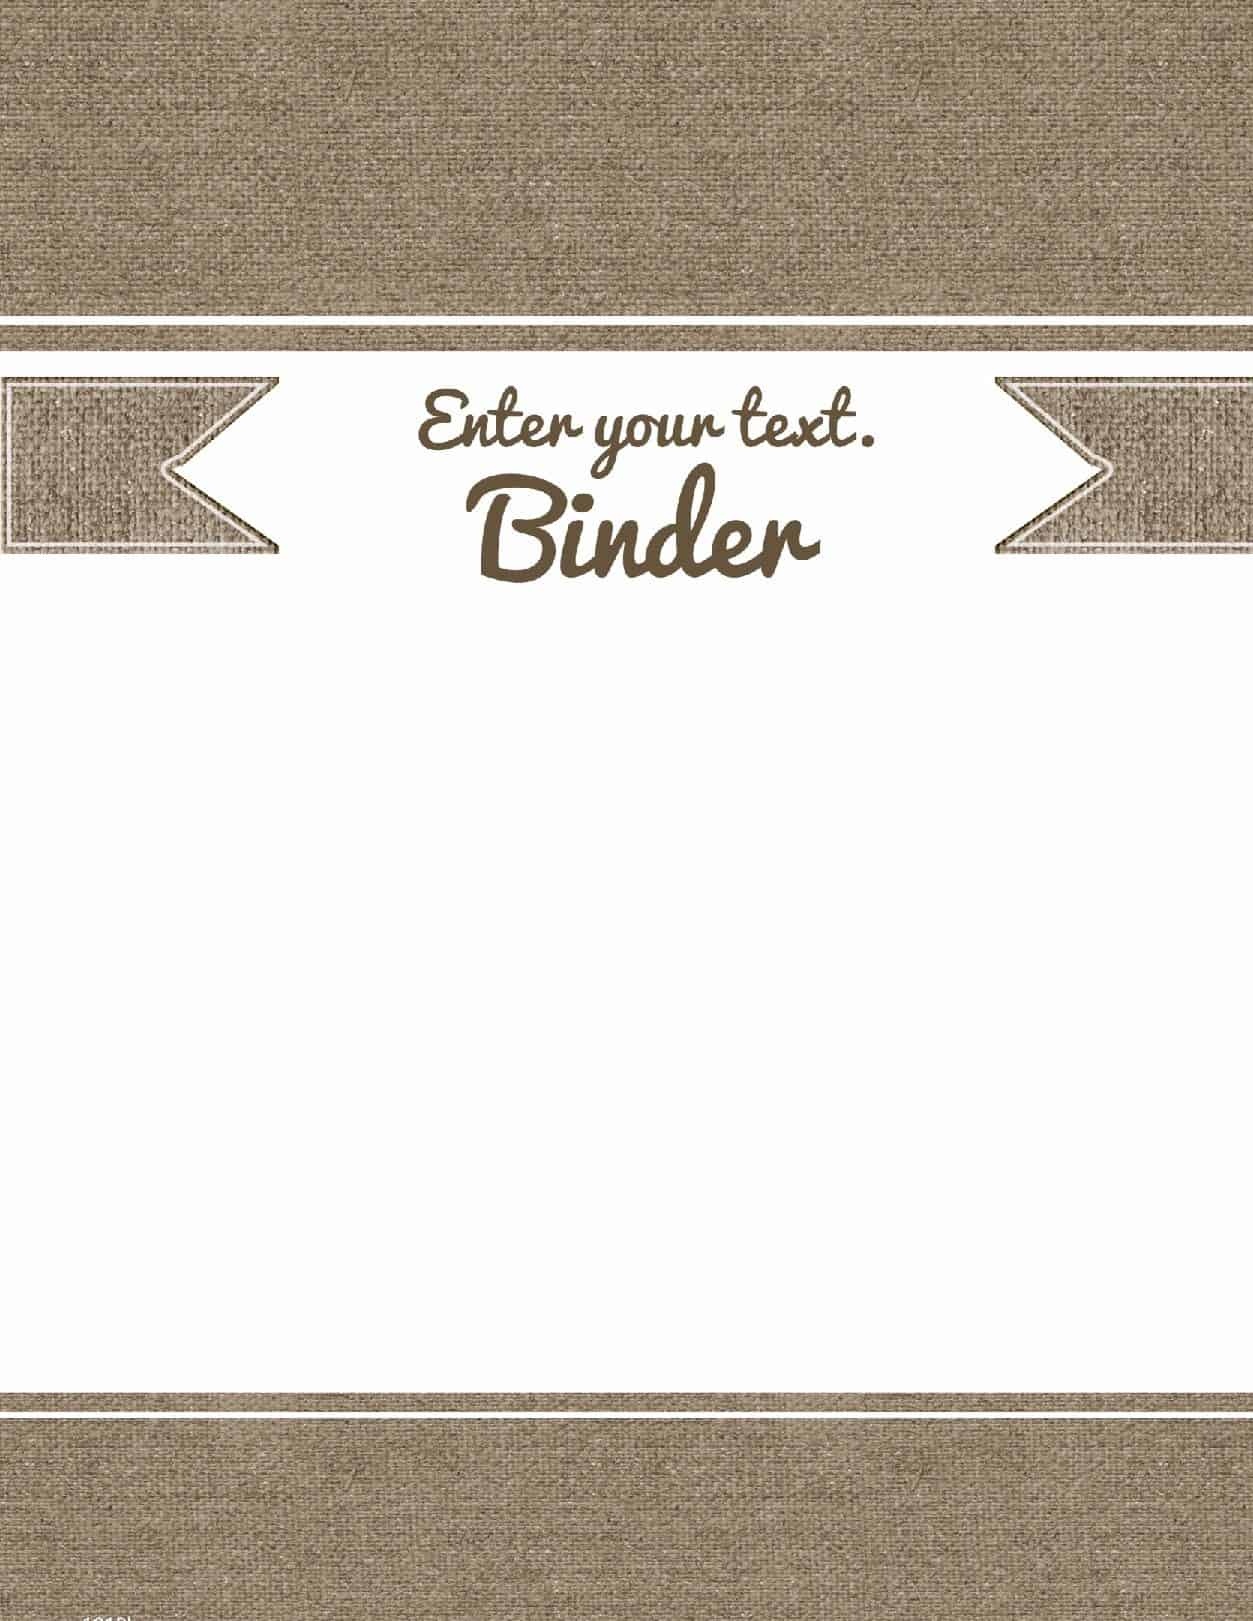 Free Binder Cover Templates | Customize Online &amp;amp; Print At Home | Free! - Free Printable Customizable Binder Covers